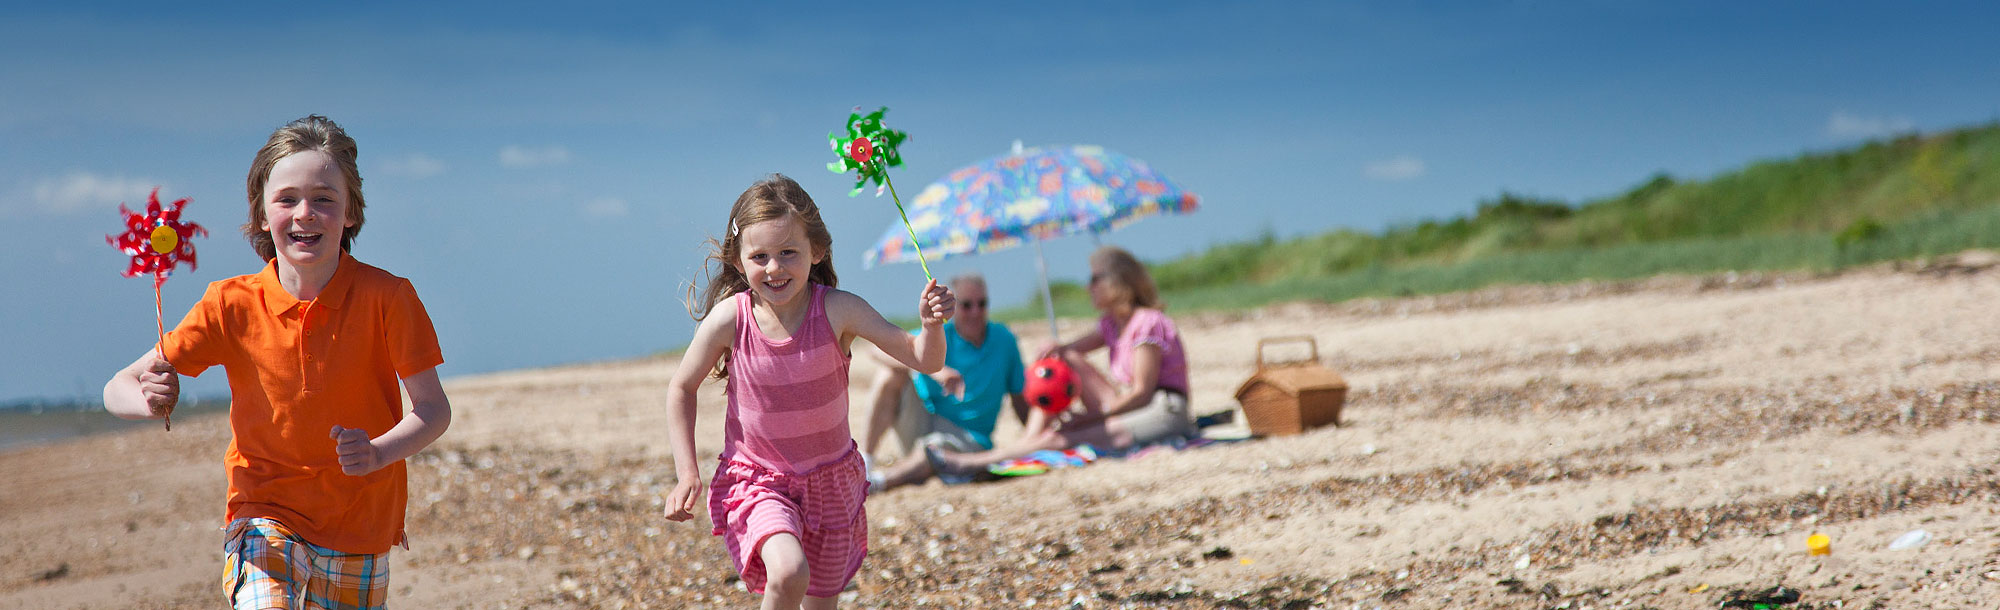 Holidays in Essex - Visit the beach